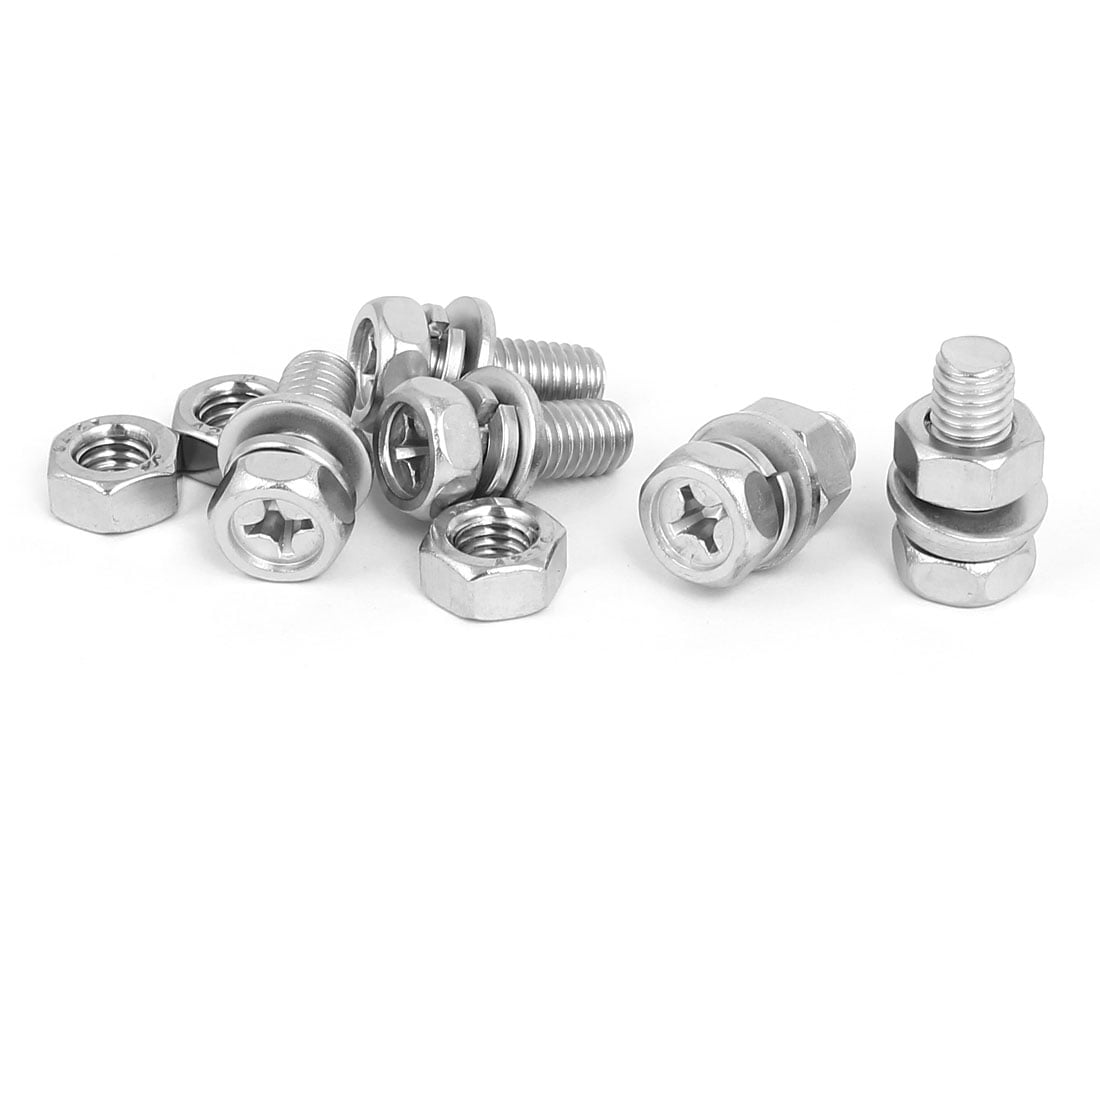 M6 High Tensile Bolts 8.8 Full Thread Screws Nylocs and Washers Pack 6,12 or 24 